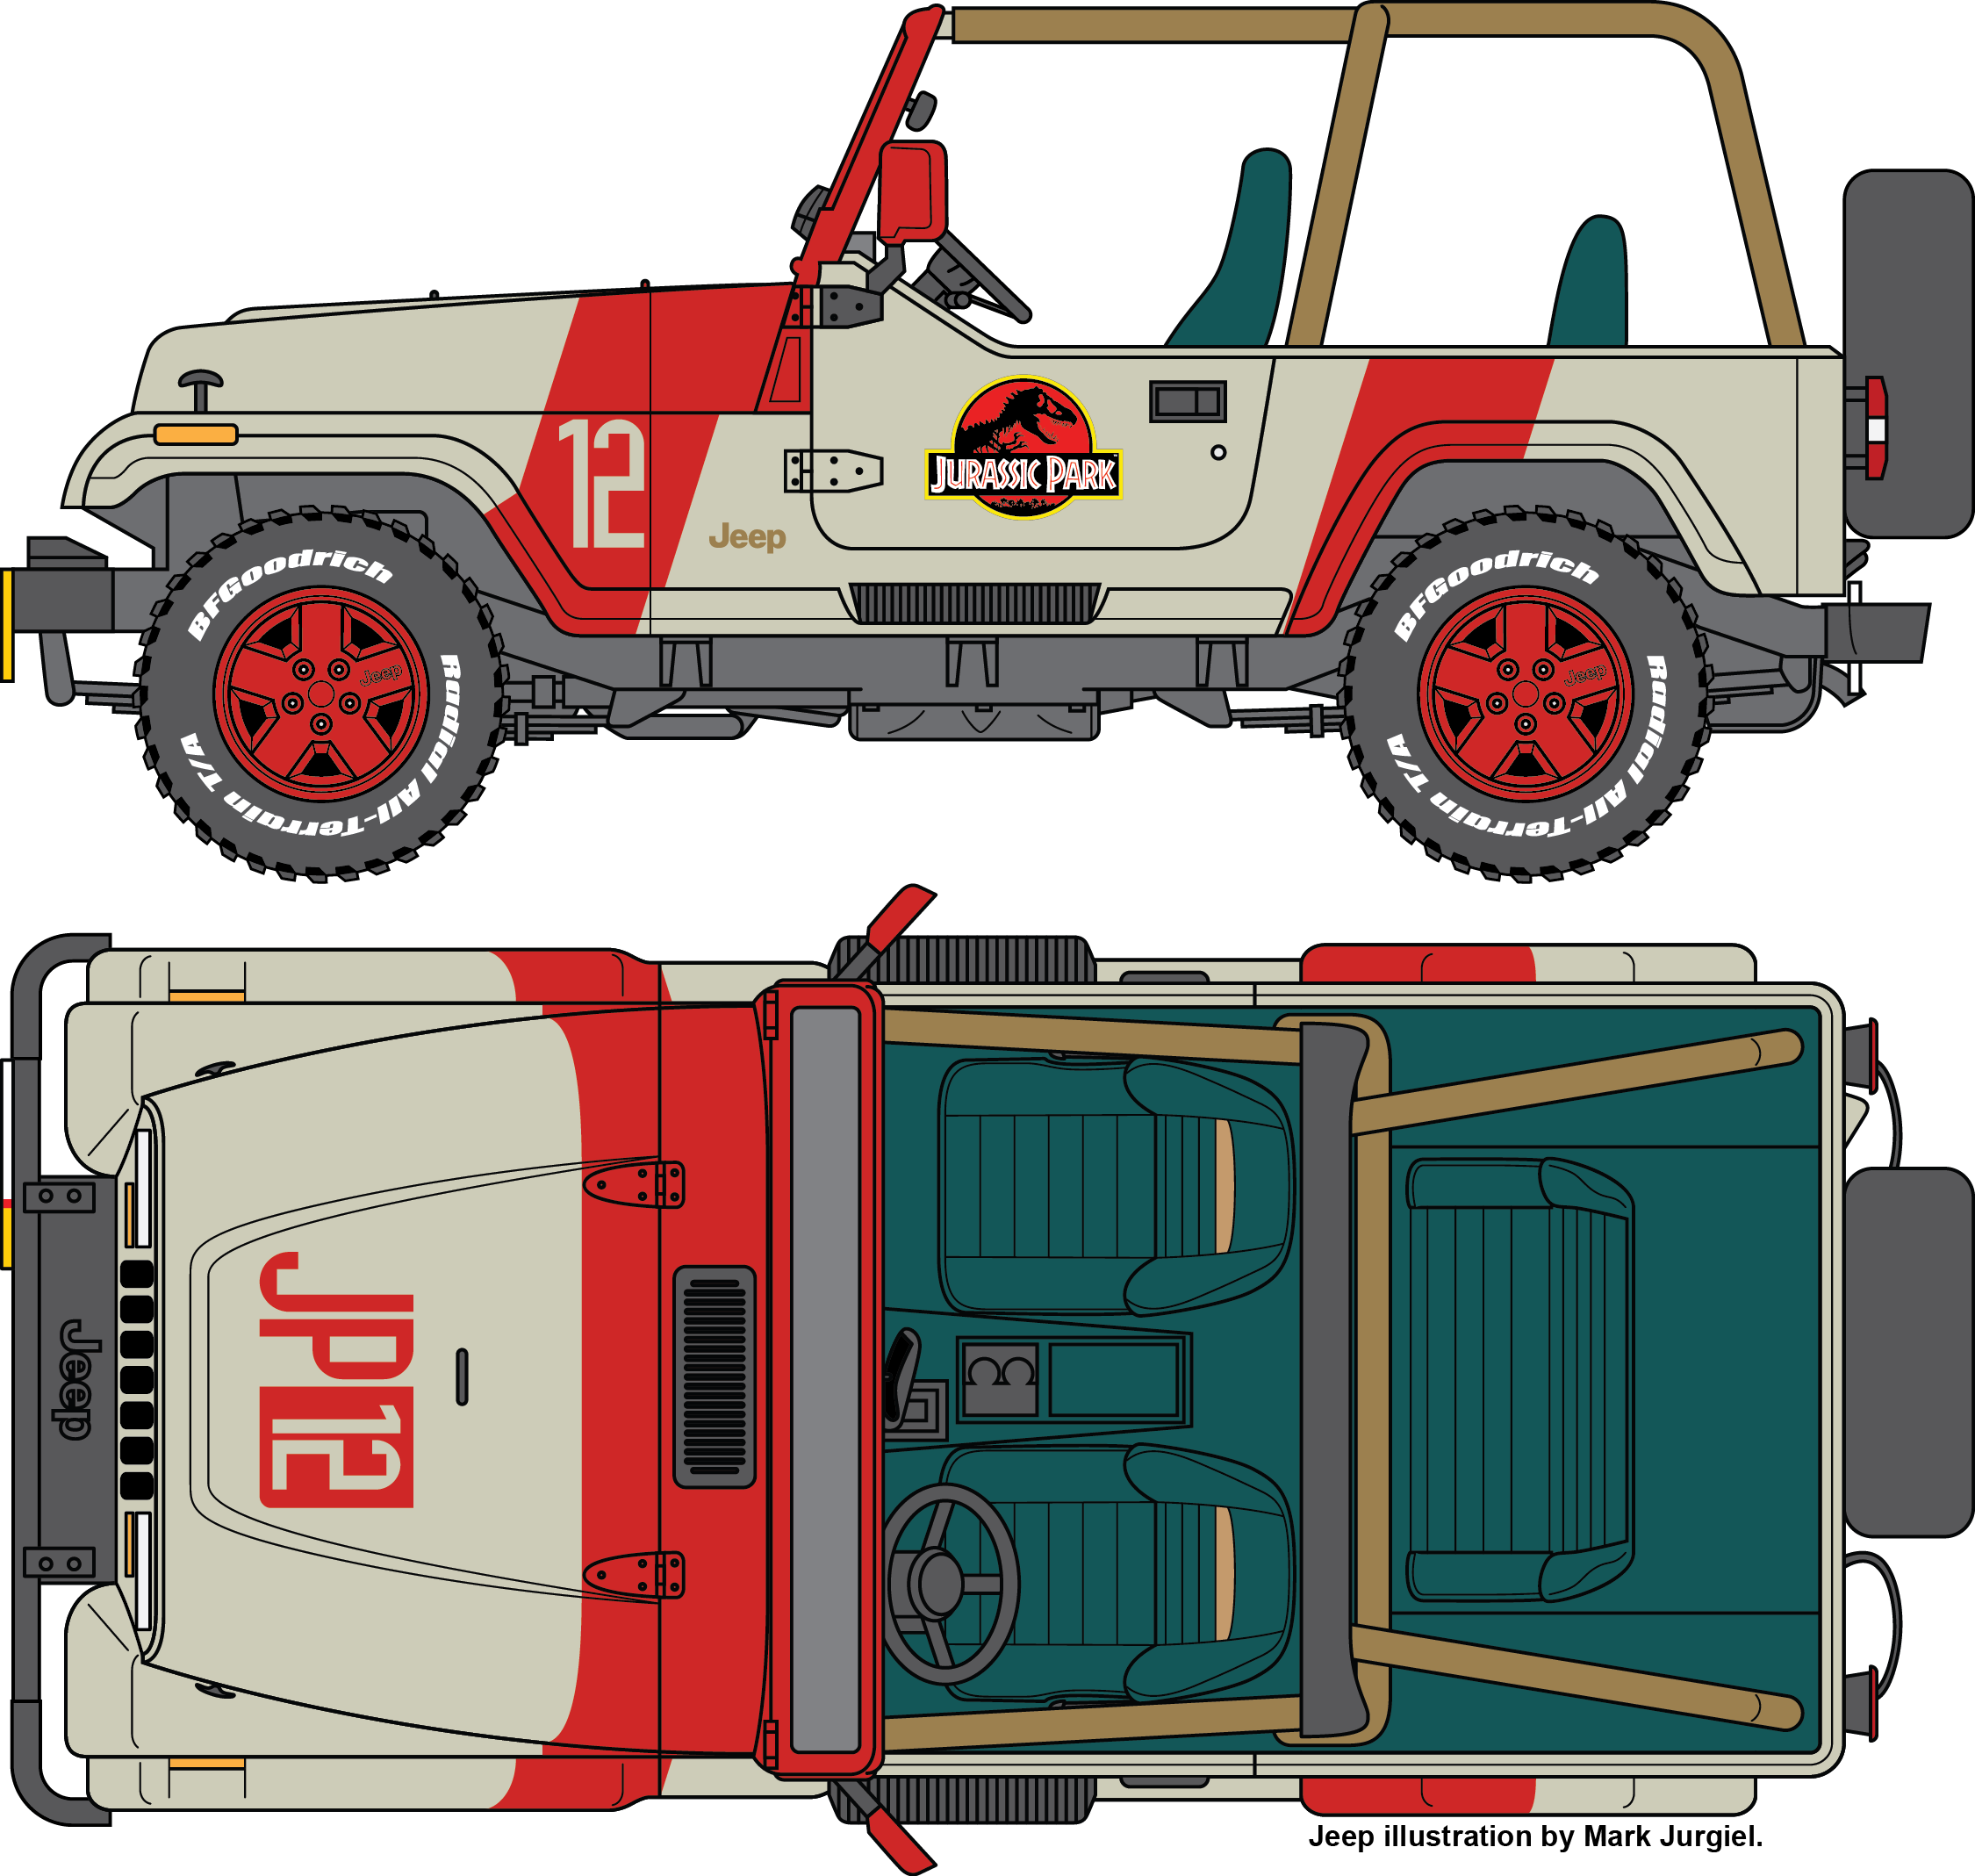 Frames illustrations hd images. Jeep clipart yj jeep